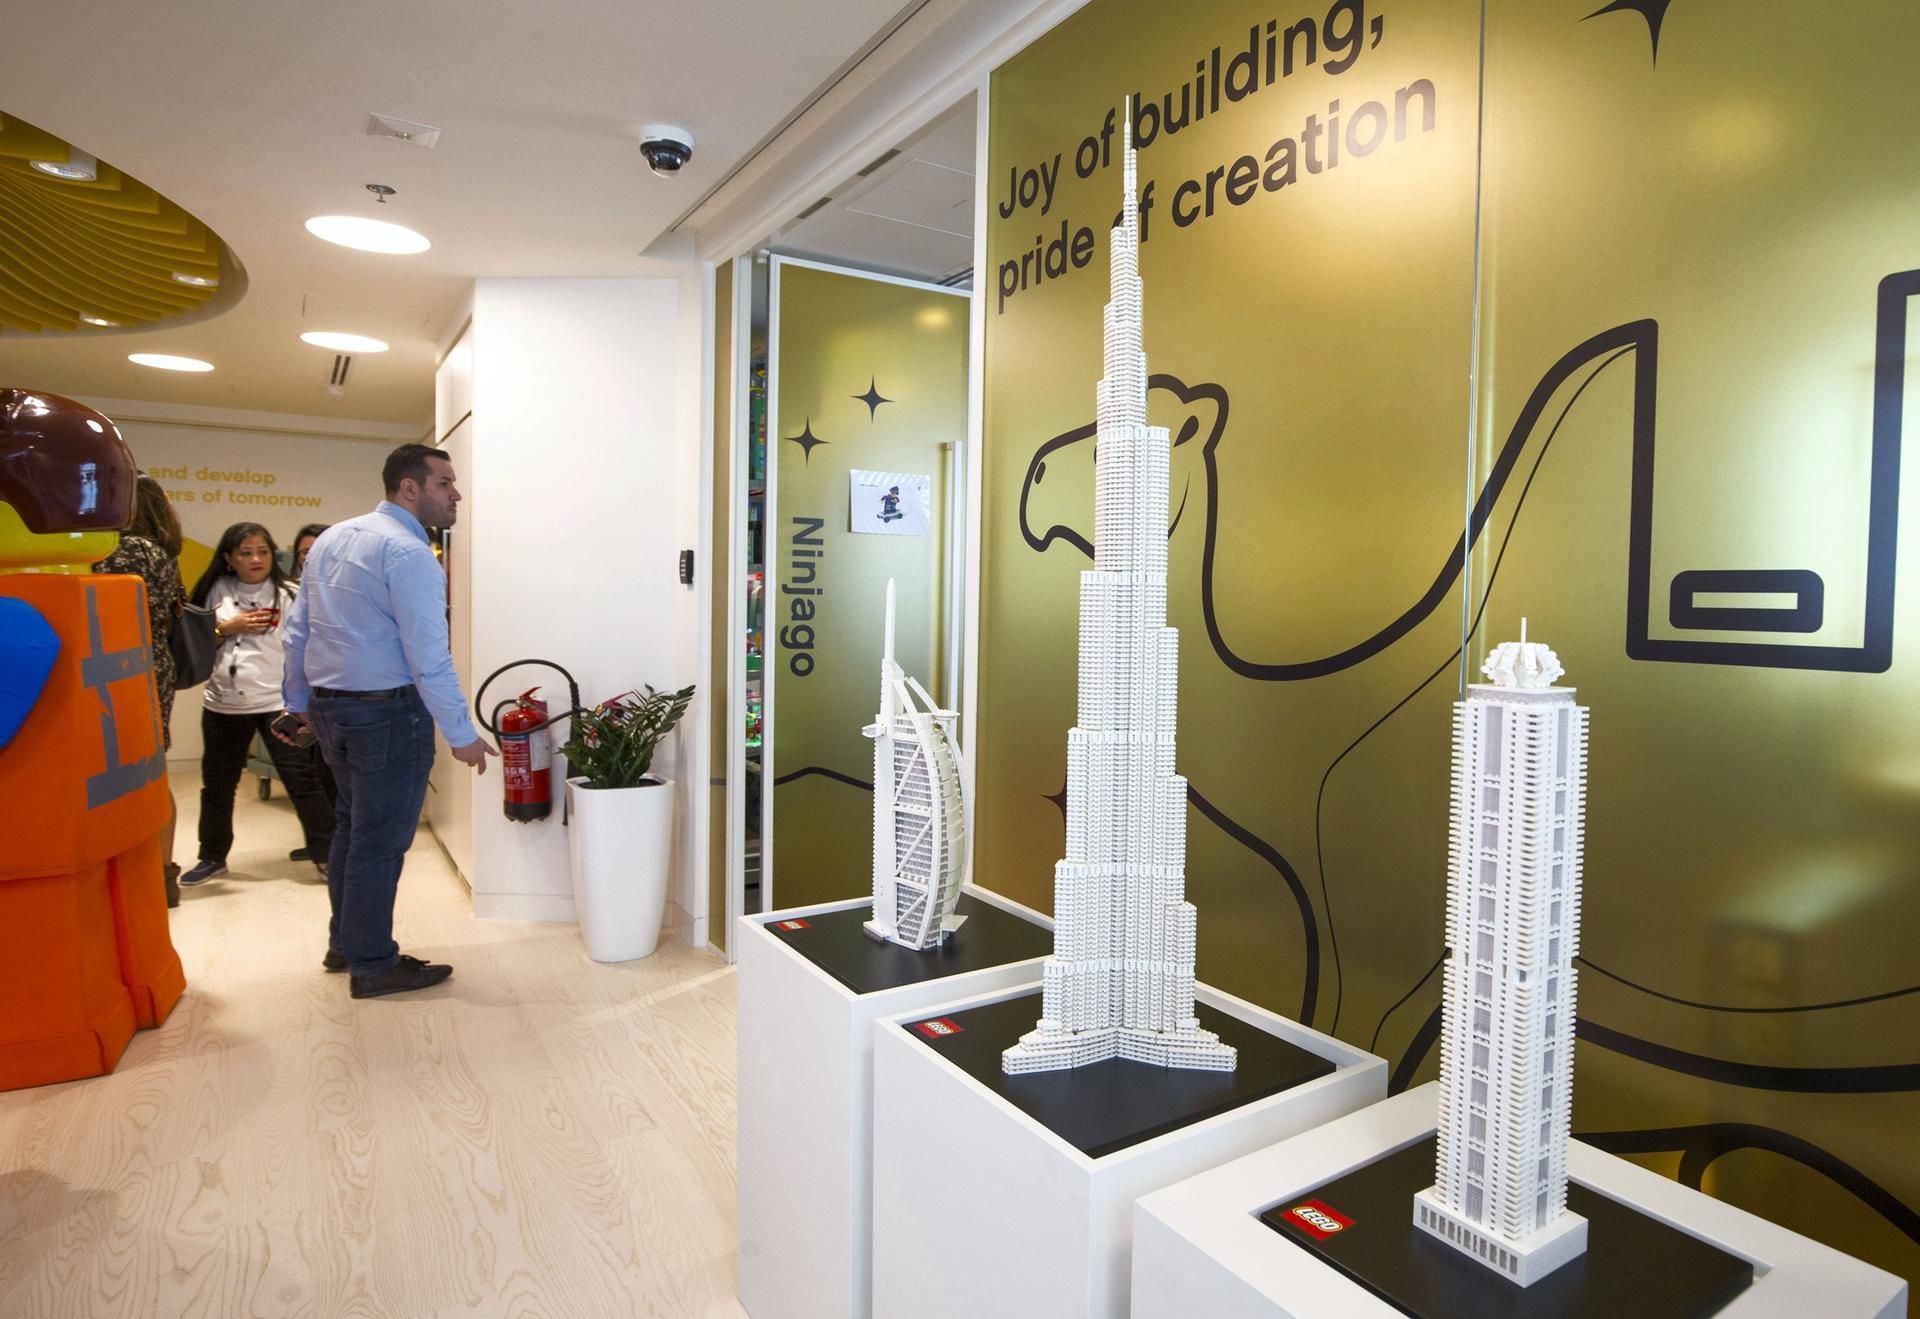 Everything is awesome inside Dubai's new Lego office